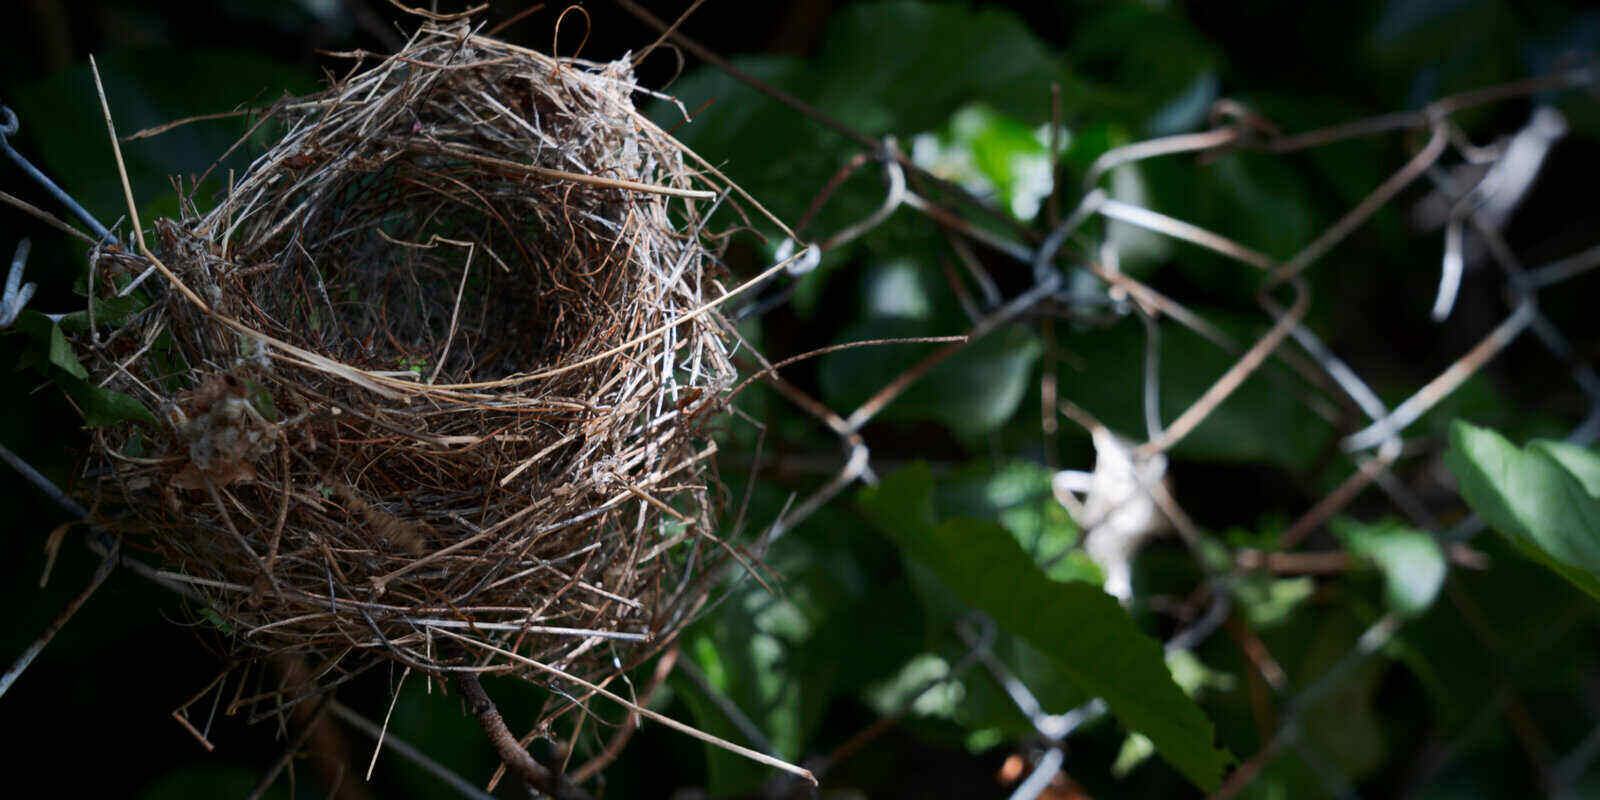 https://s33571.pcdn.co/wp-content/uploads/2022/01/abandoned-birds-nest-during-the-late-spring-near.jpg